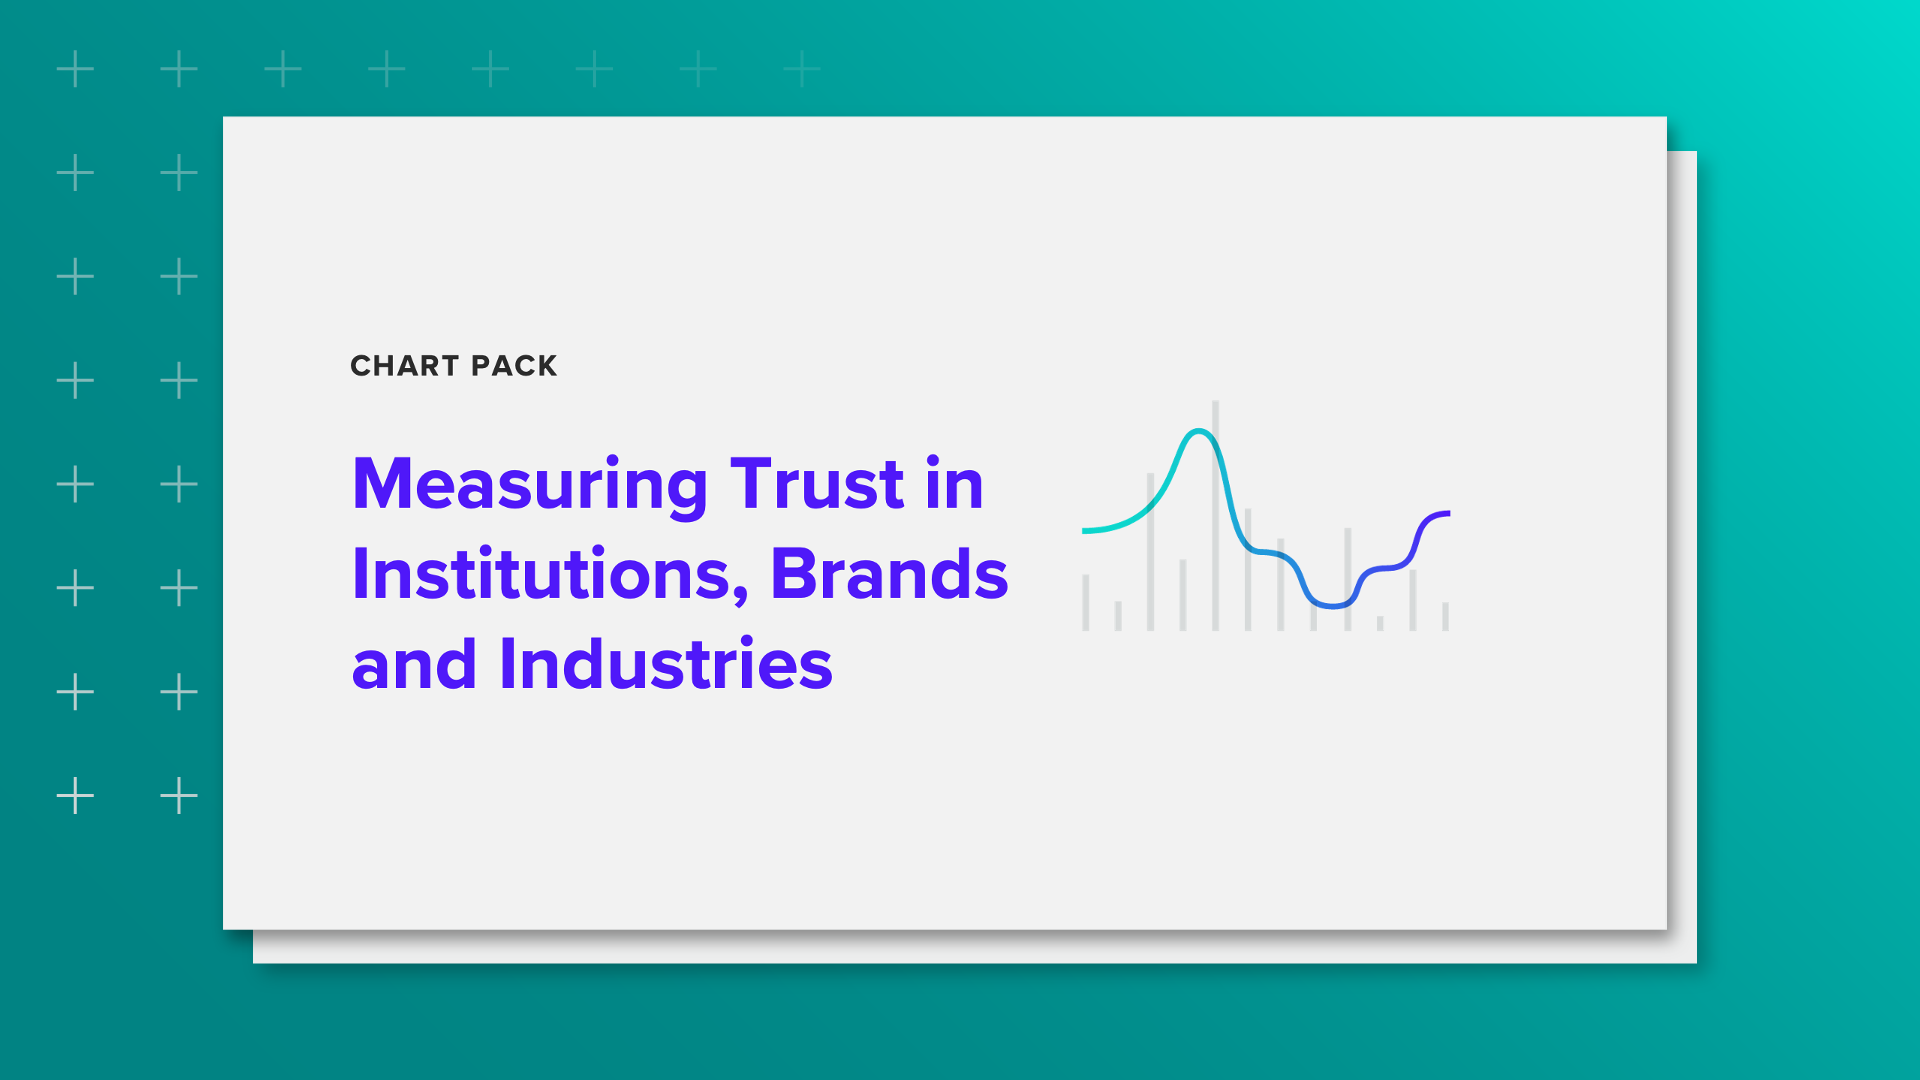 Download the Chart Pack: Measuring Trust in Institutions, Brands and Industries